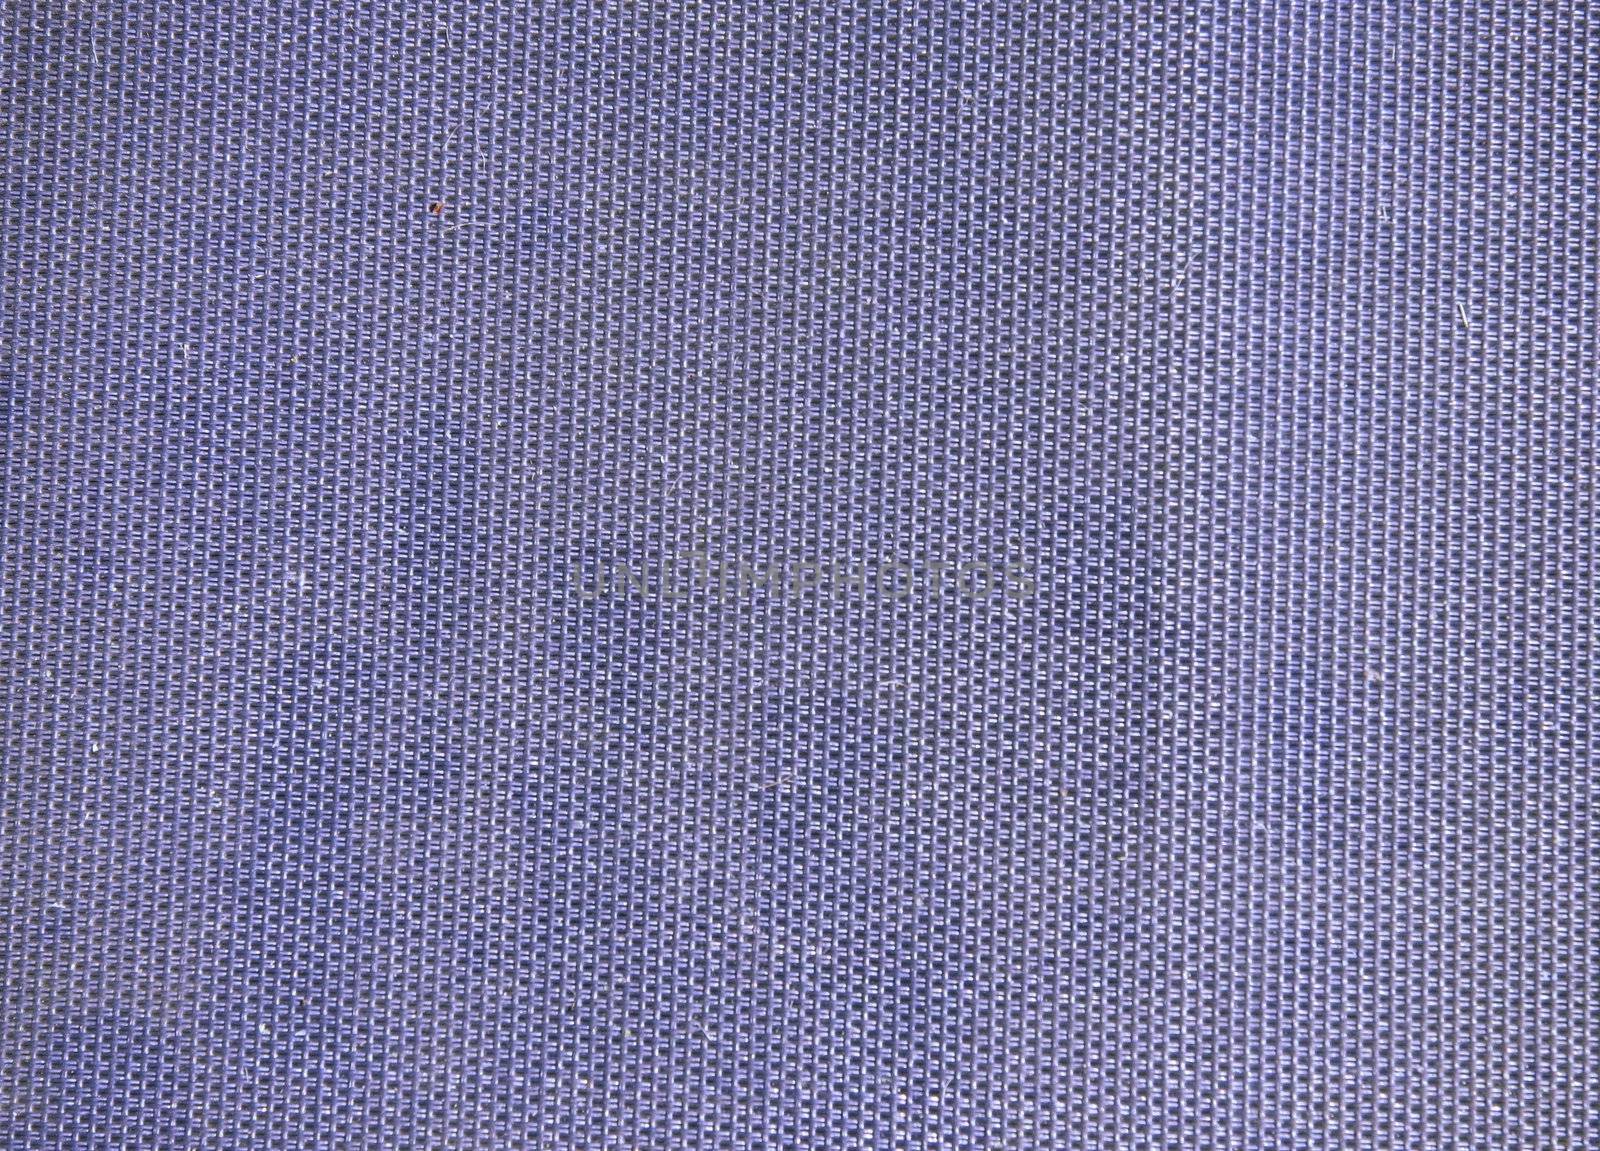 woven blue material creating a abstract background